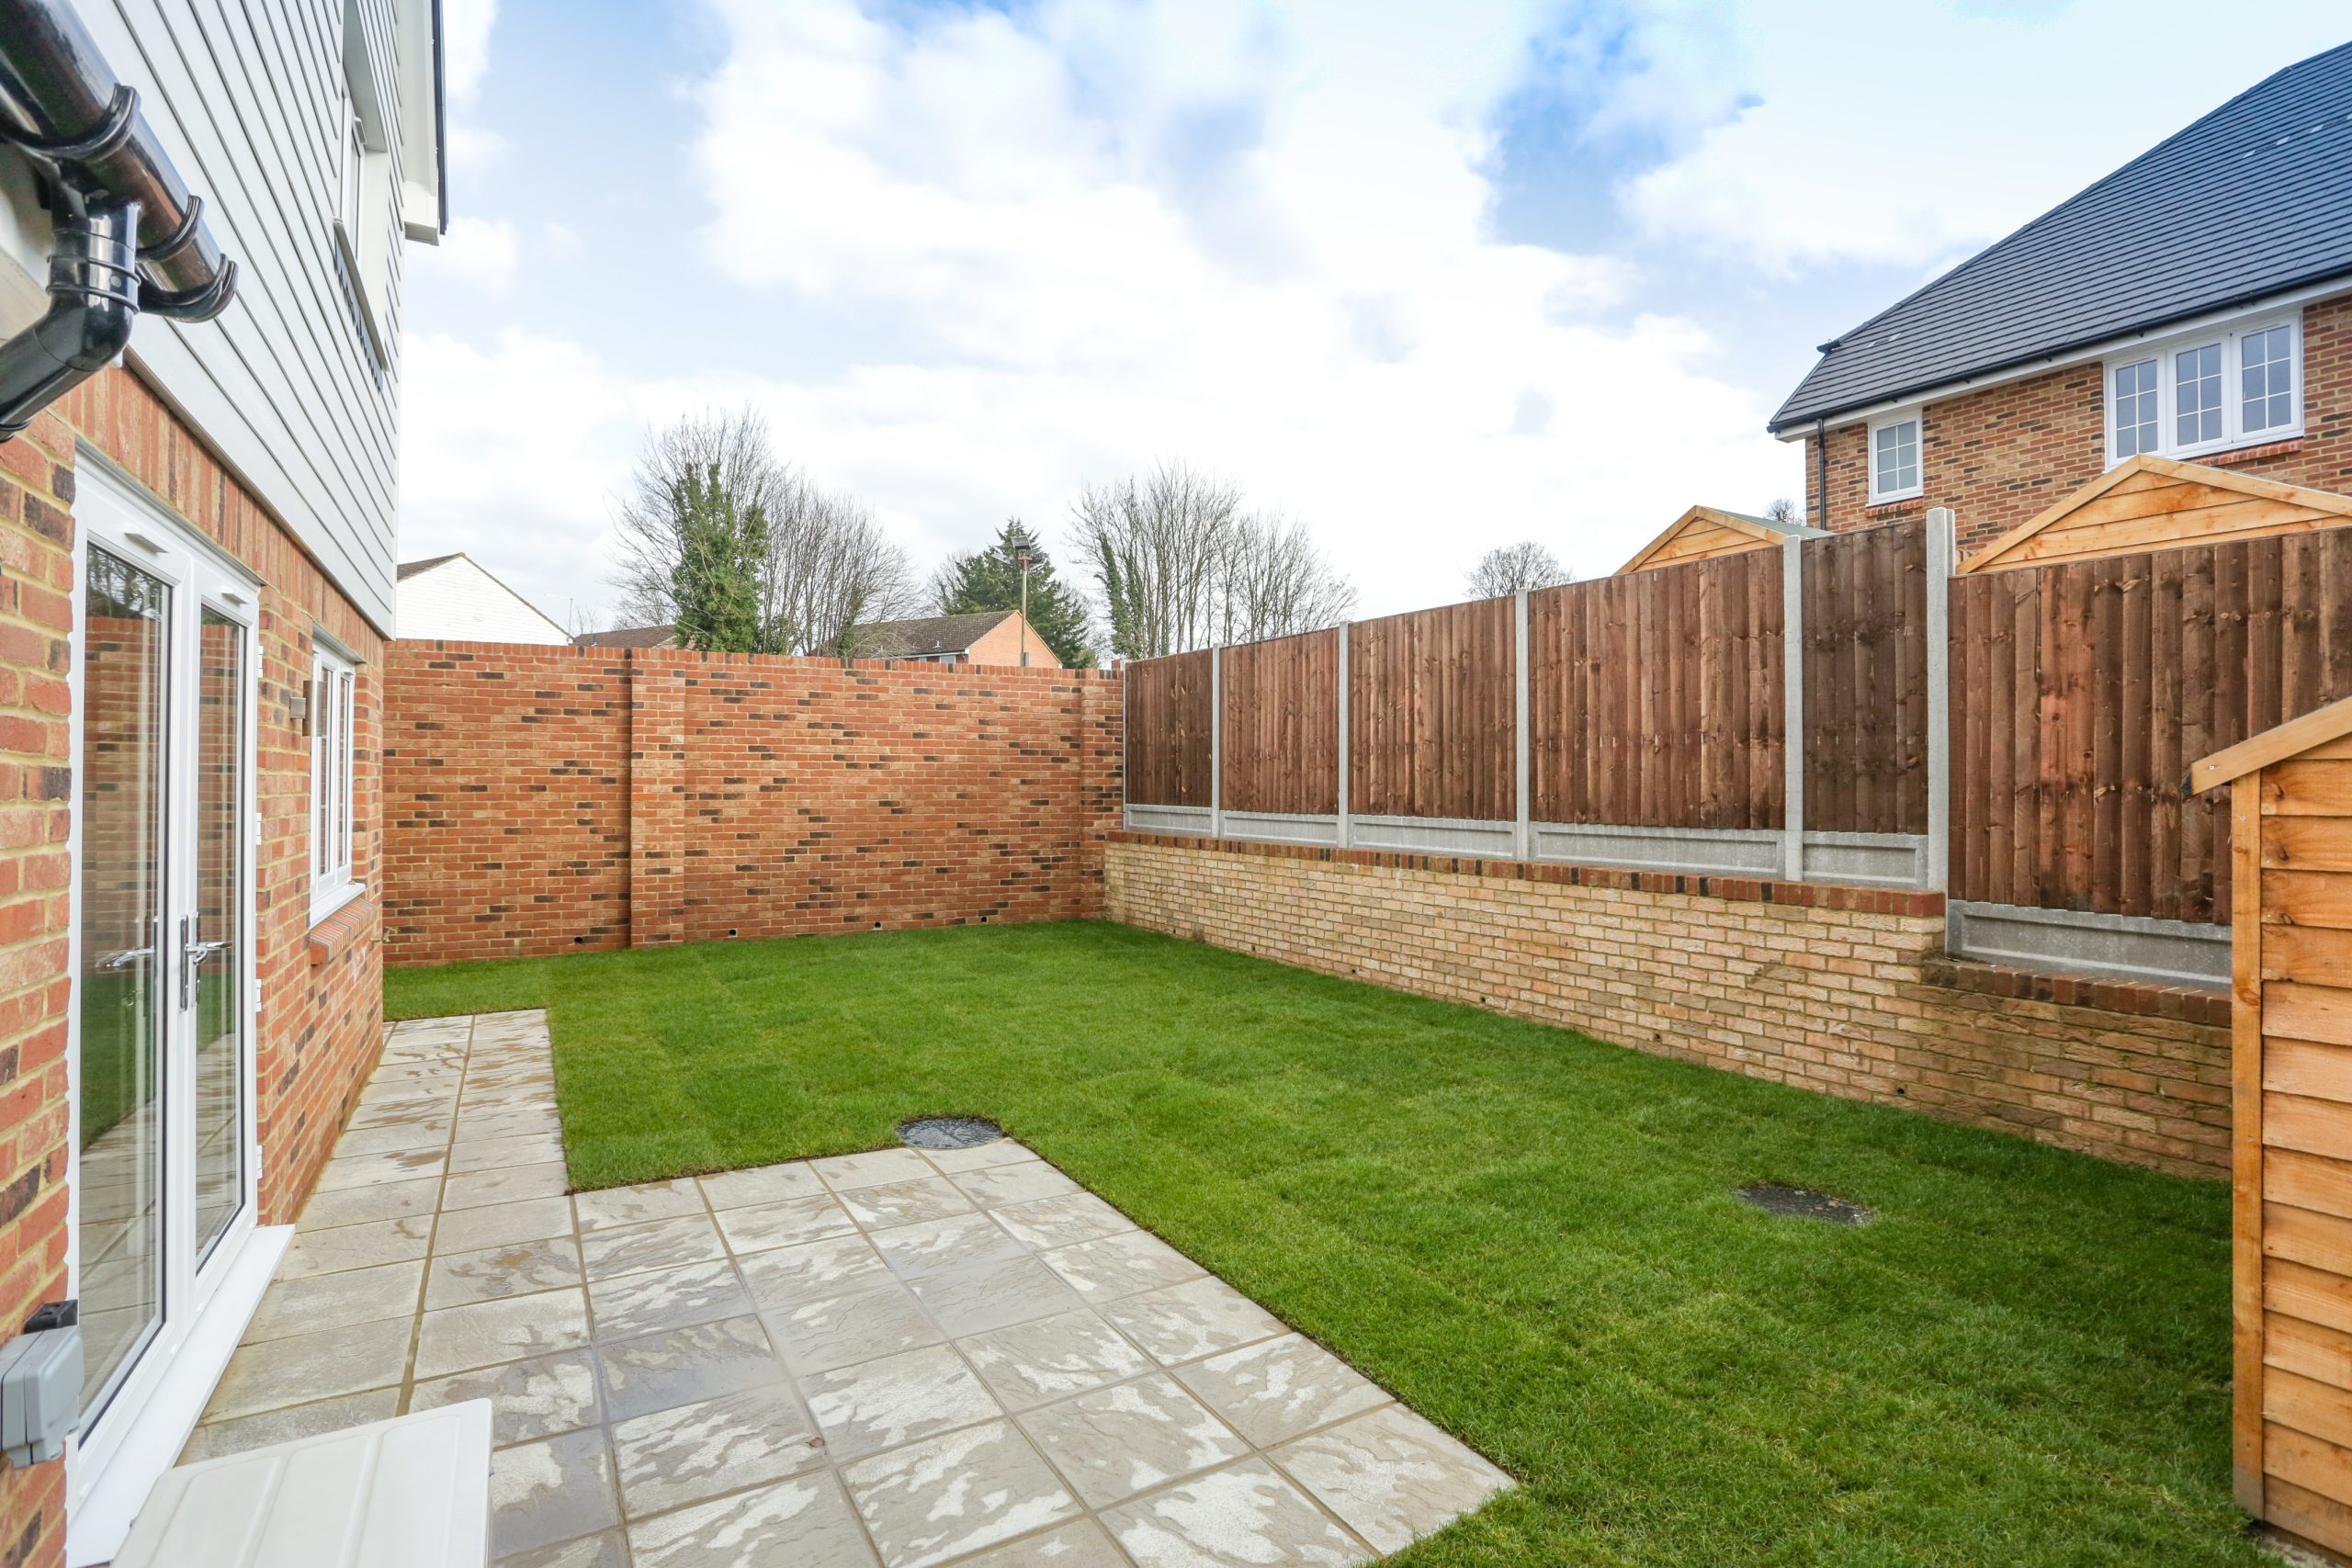 Garden at our Ivy Court development with grass and tiling and shed.